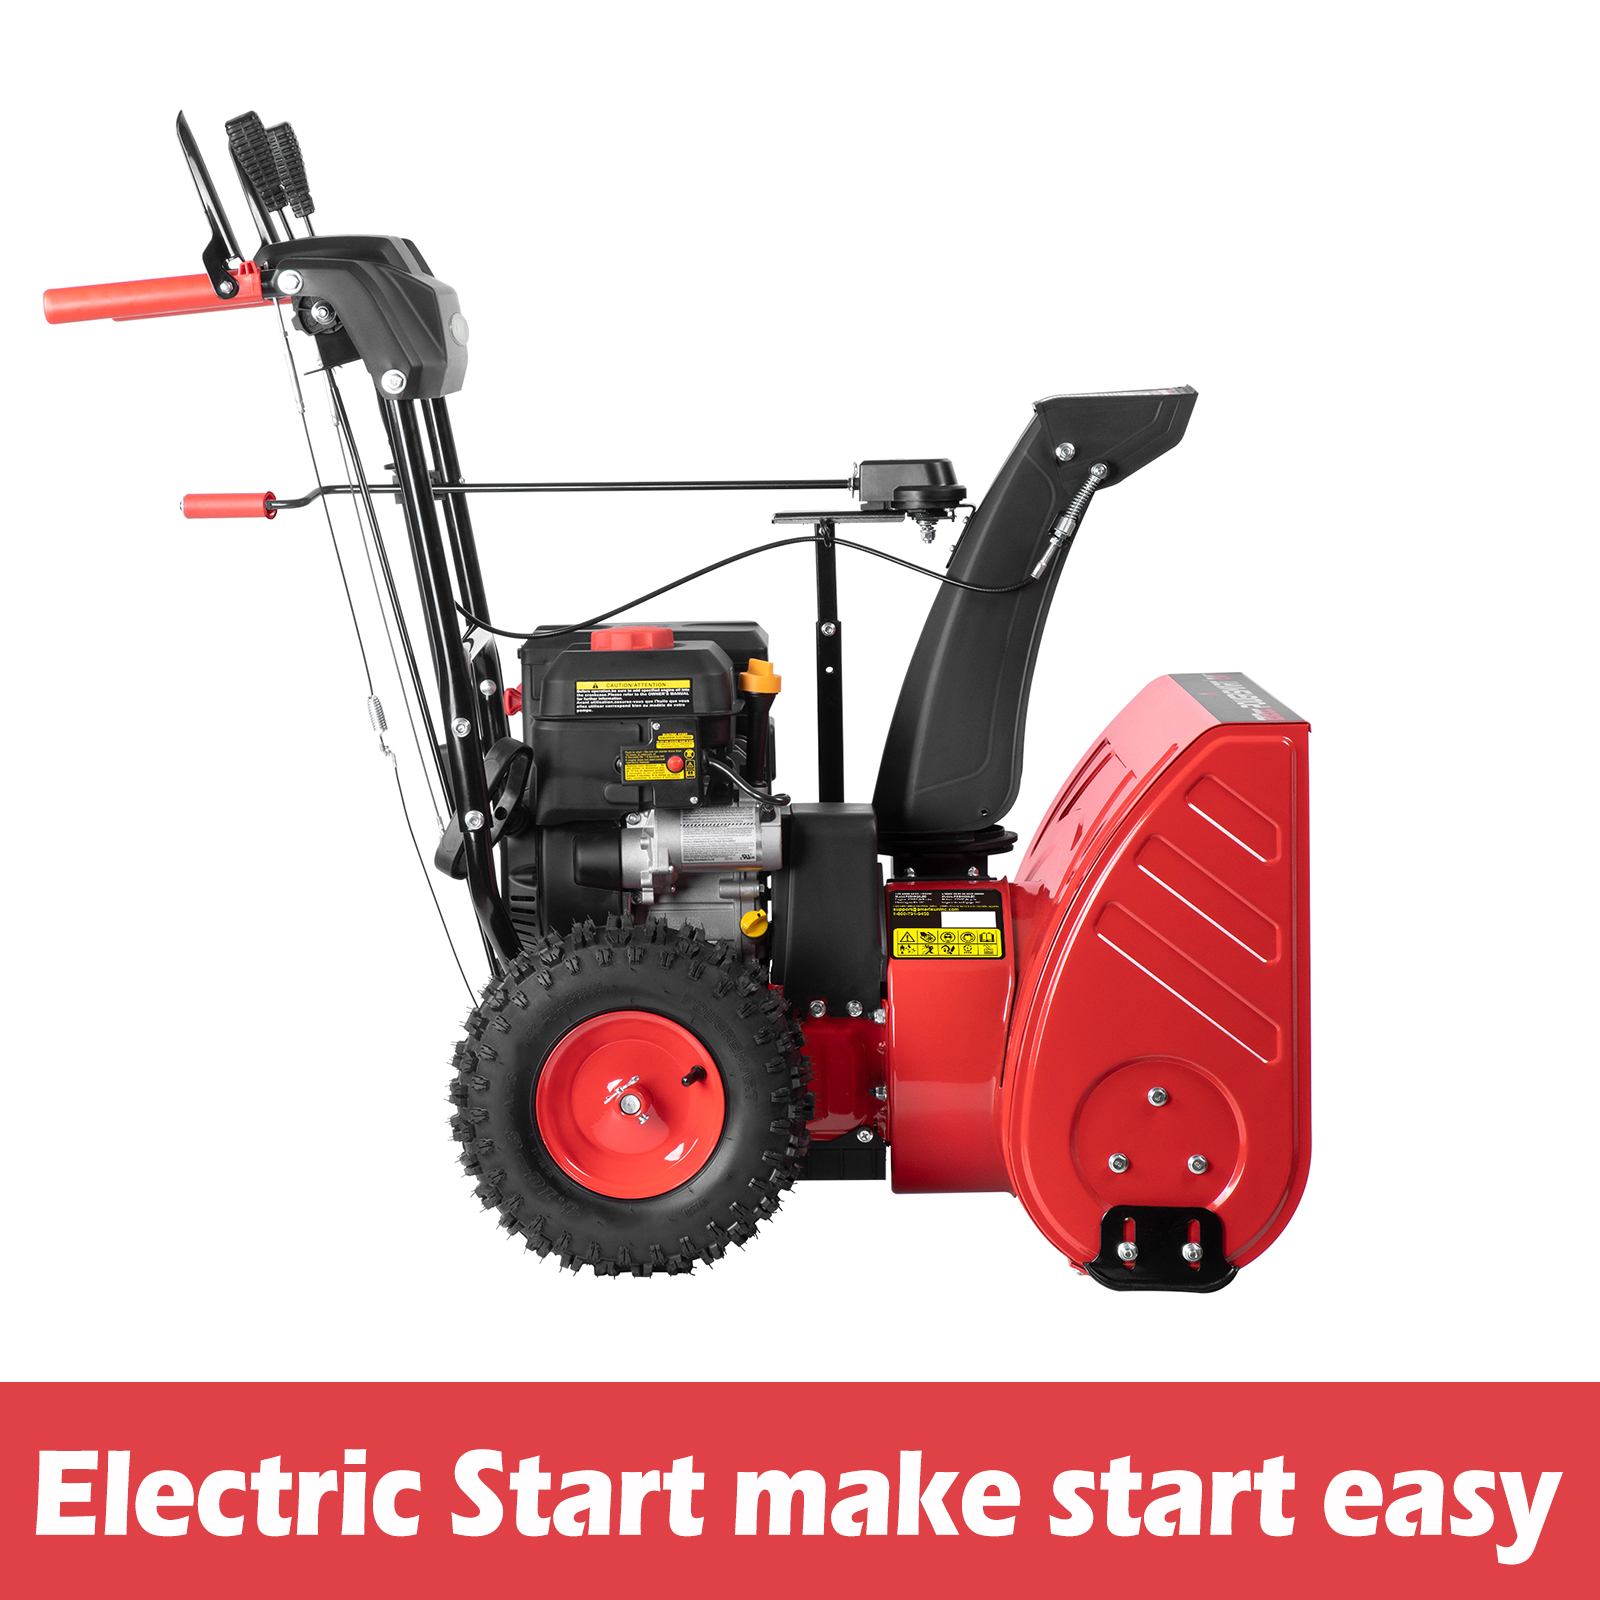 PowerSmart 26 in. Two-Stage Electric Start 252CC Self Propelled Gas Snow Blower - image 4 of 5